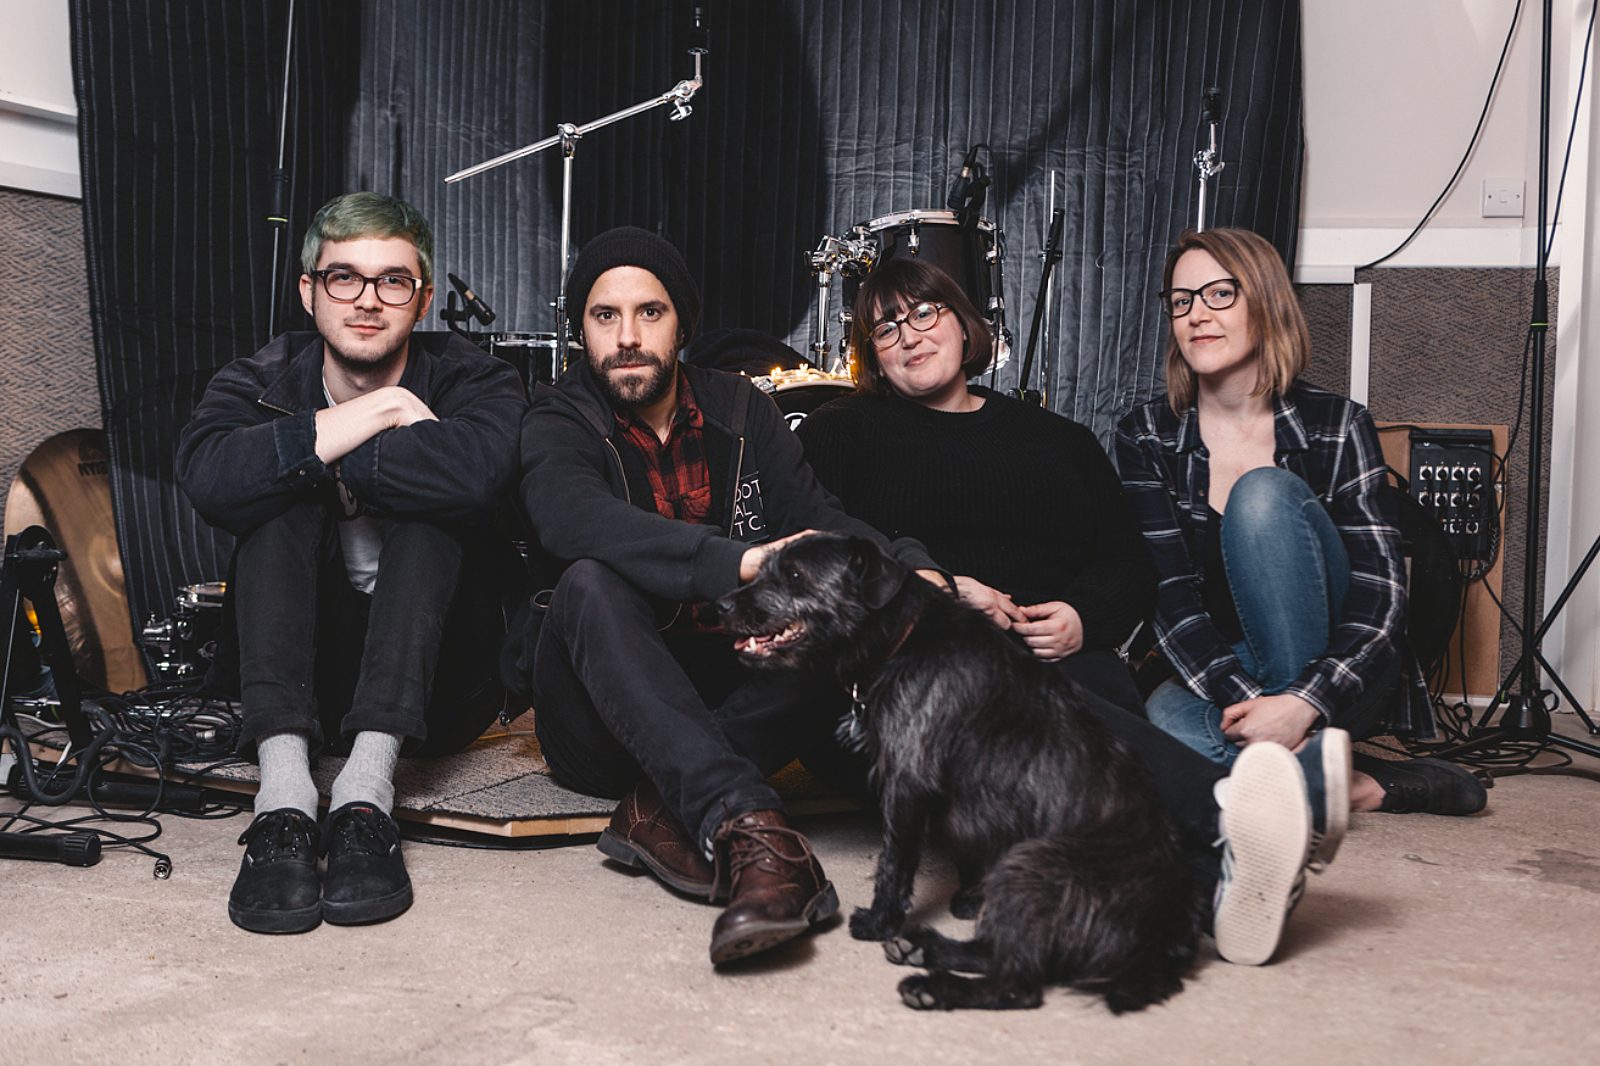 Personal Best make a racket in new video for 'I Go Quiet'